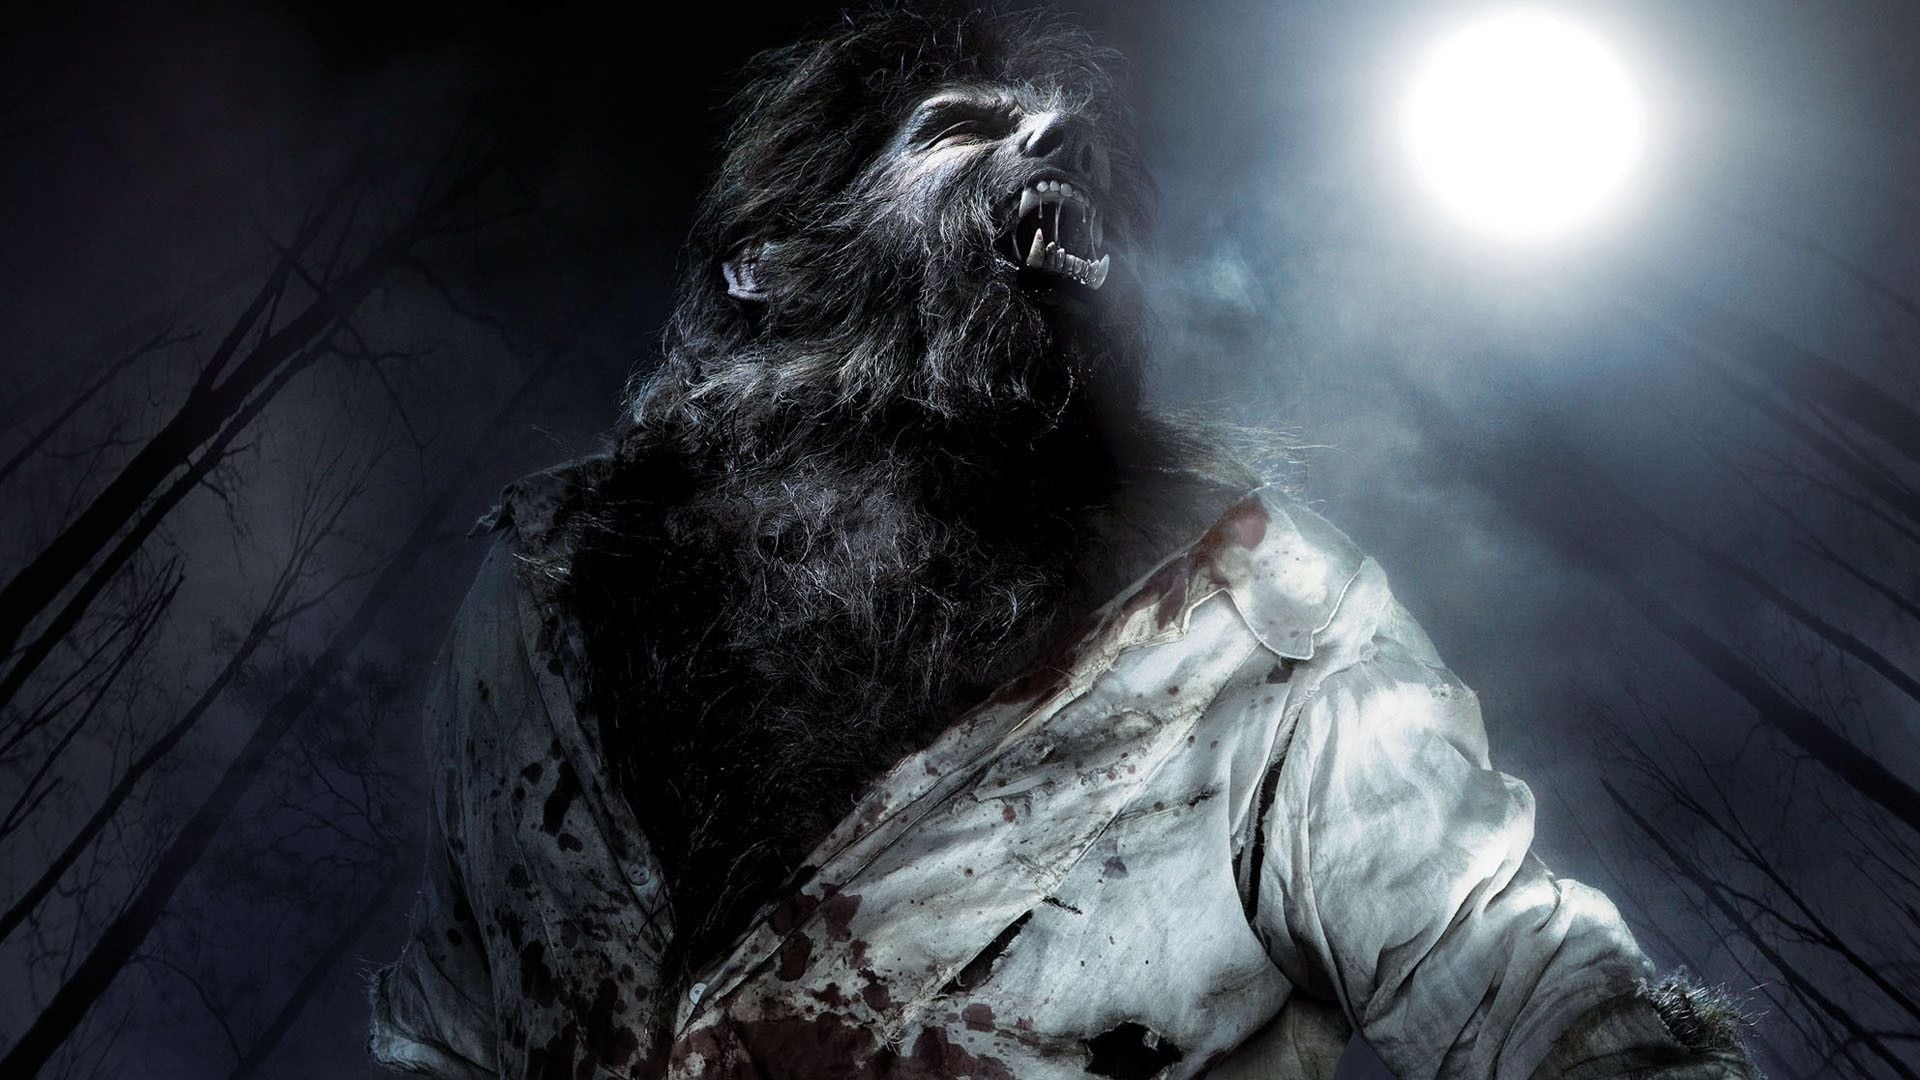 The Wolfman backdrops, Movie settings, Dark atmosphere, Gothic visuals, 1920x1080 Full HD Desktop